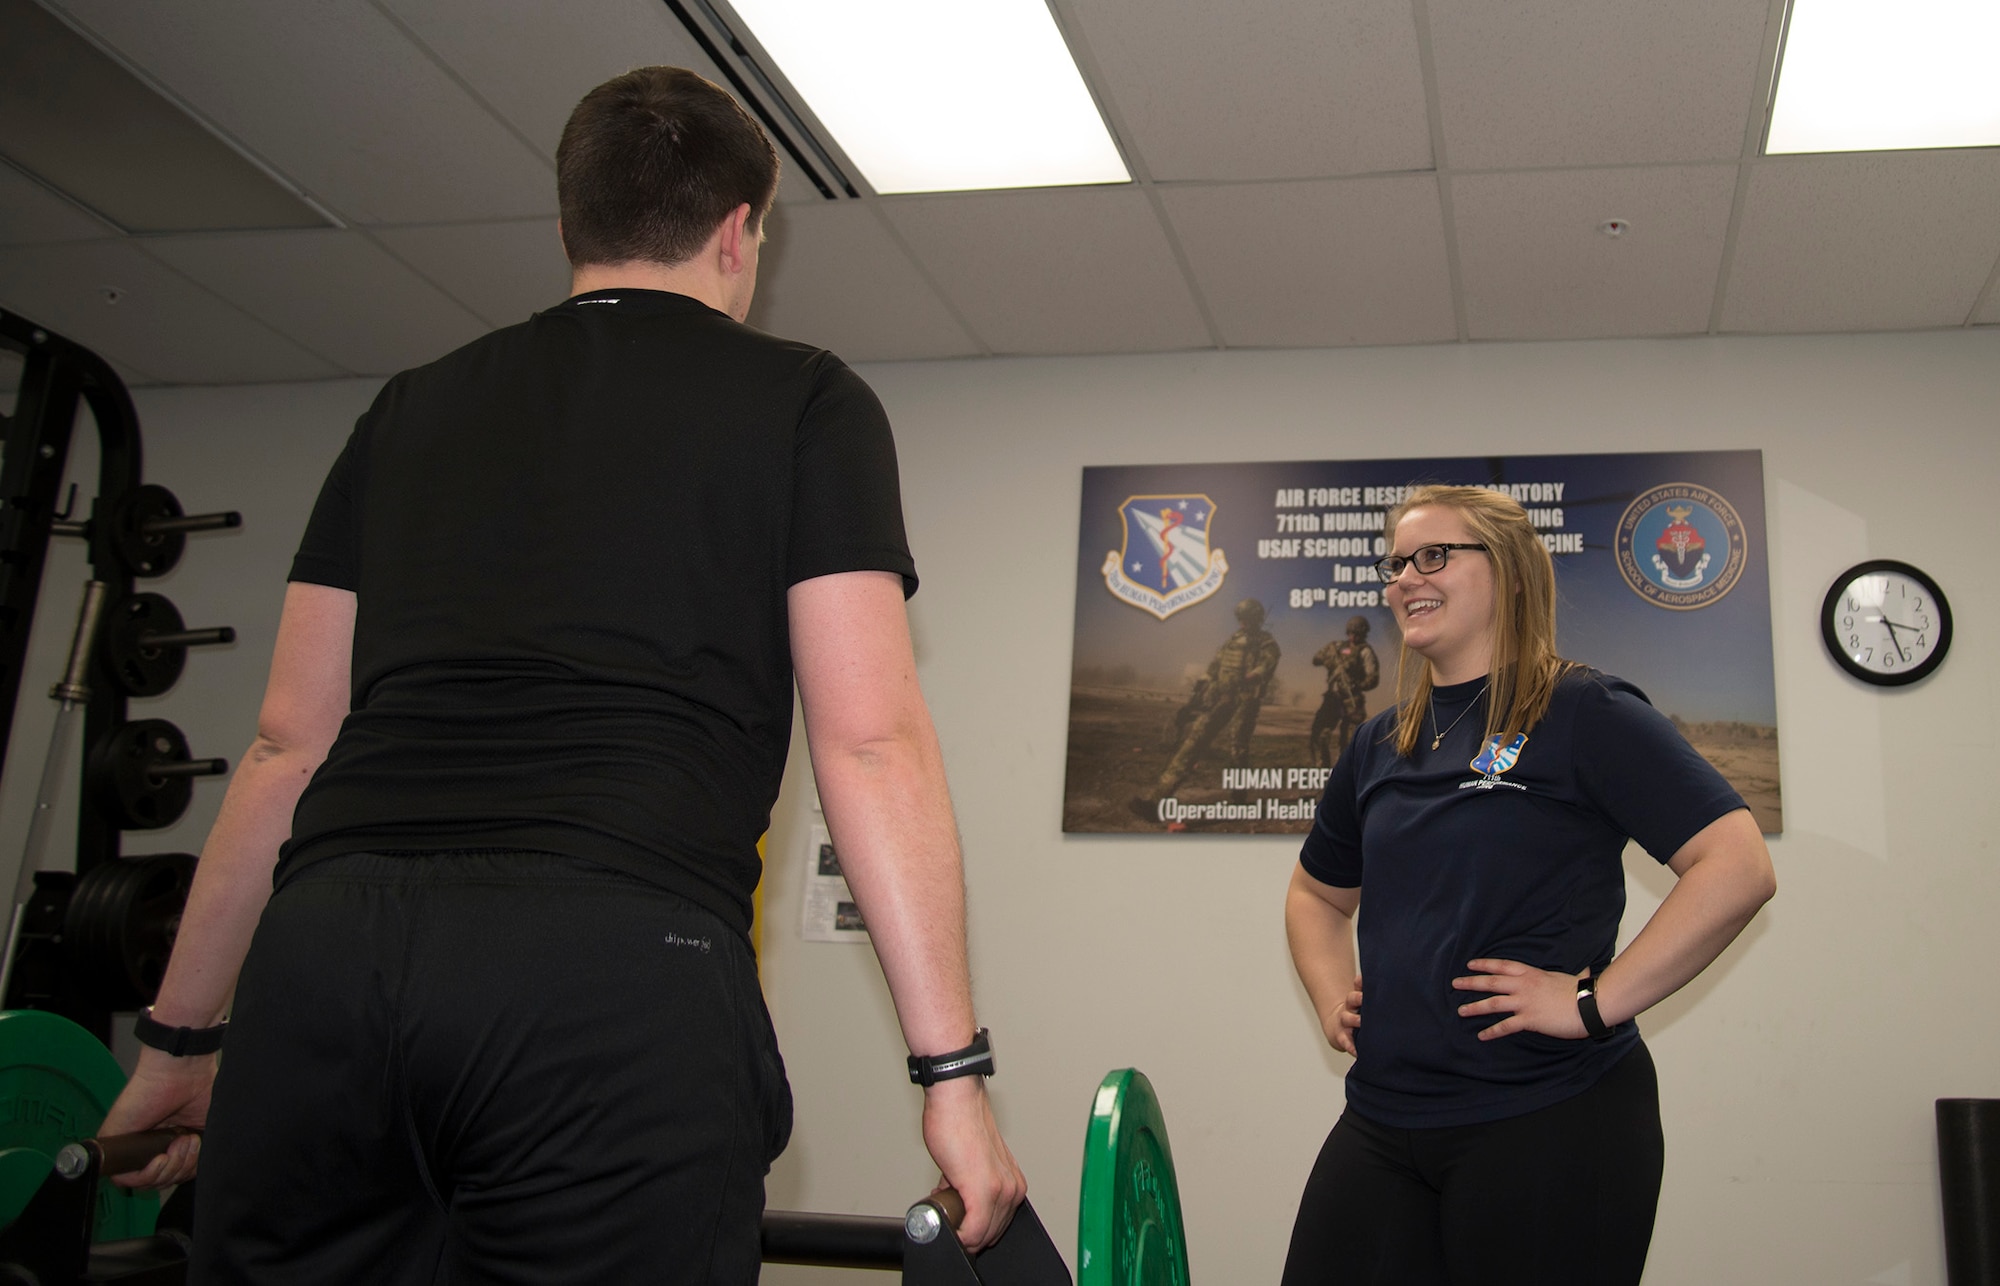 Hannah Kohne, a contractor at the 711th Human Performance Wing, takes Staff Sgt. Alan Gagnon through an exercise routine as a part of the Function Bridge Fitness Study at Wright Patterson Air Force Base, Feb. 14, 2019.